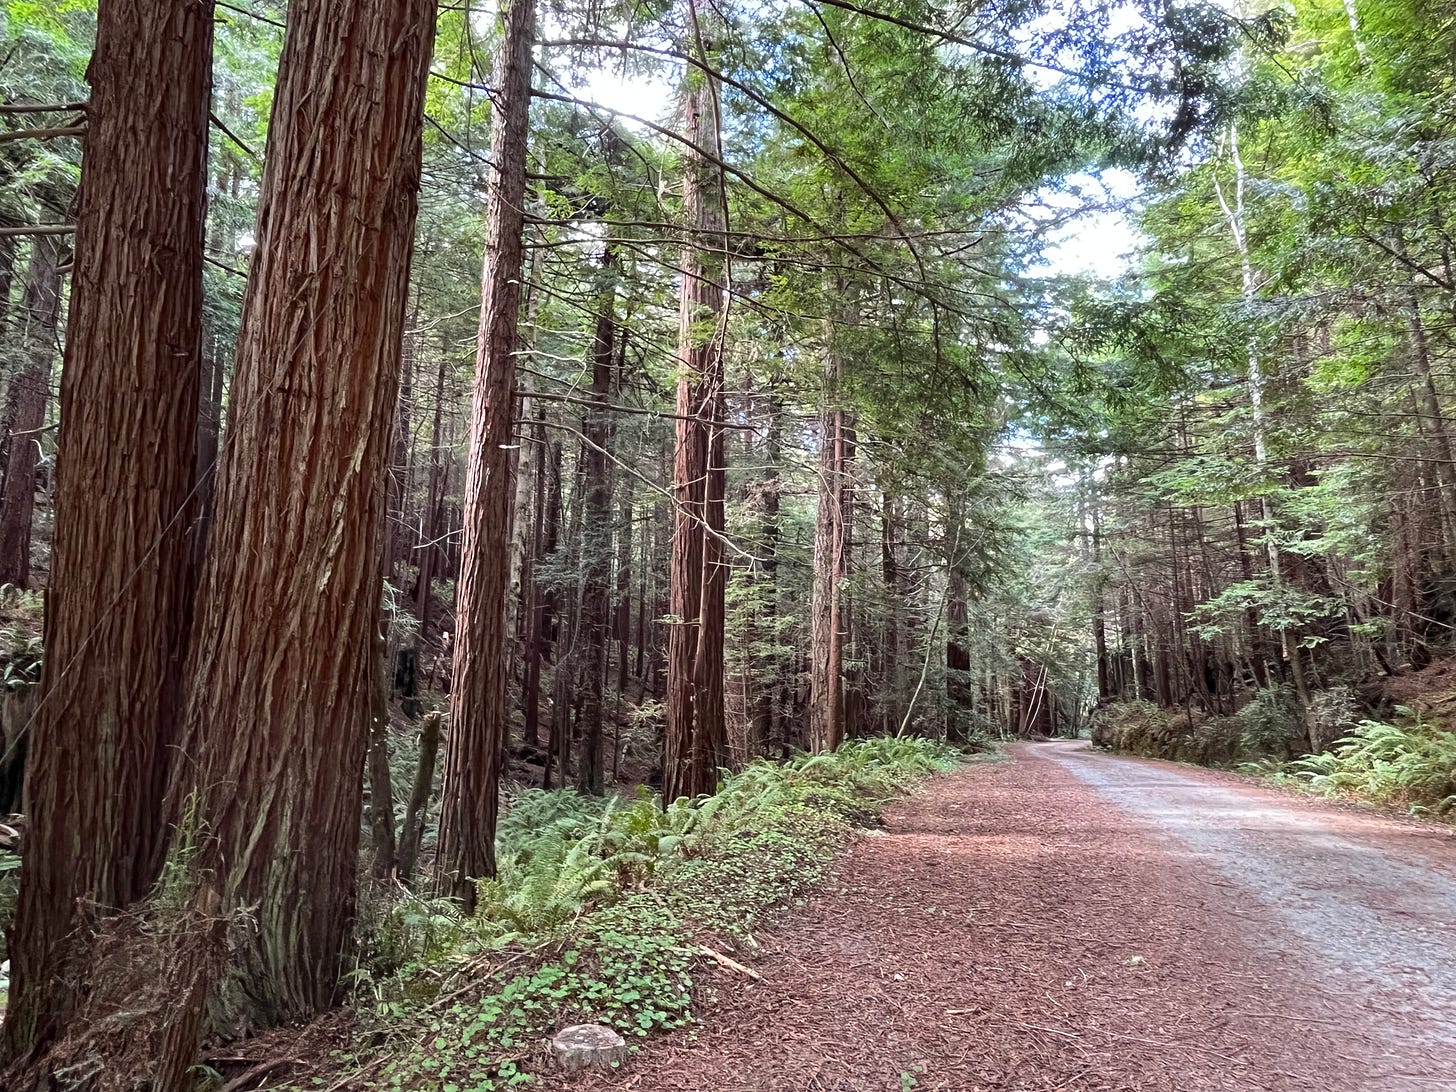 A young redwood forest with a dirt road to the side